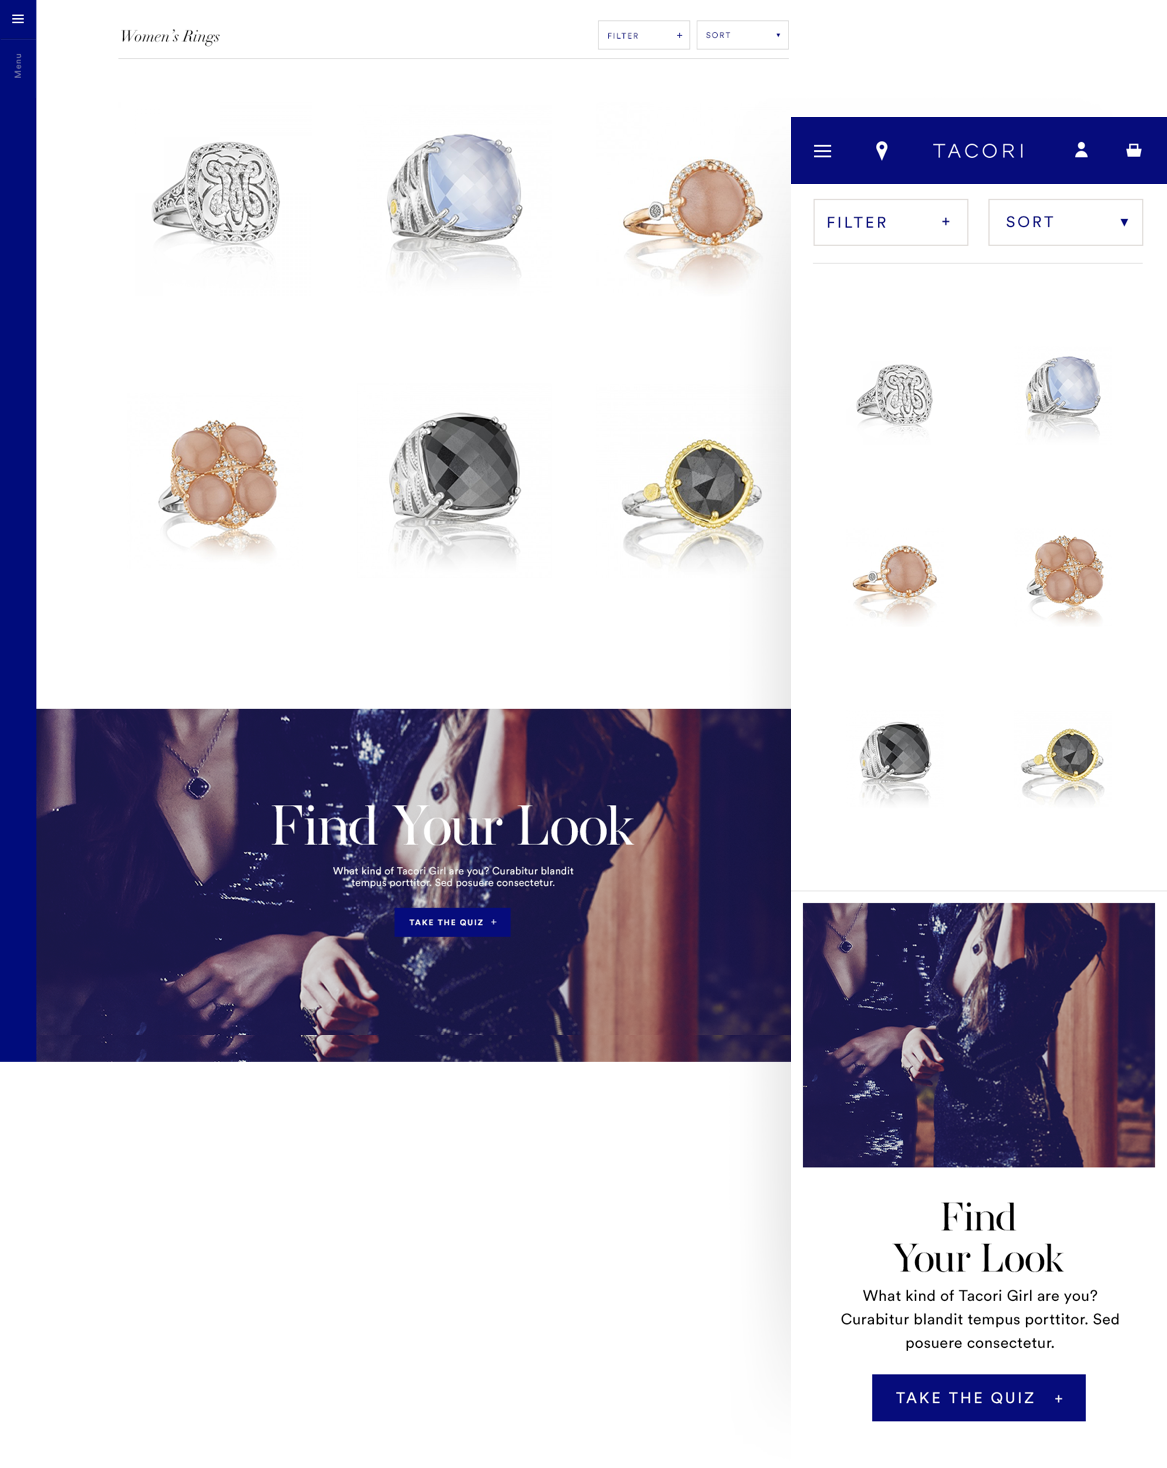 Tacori Product Listings Page